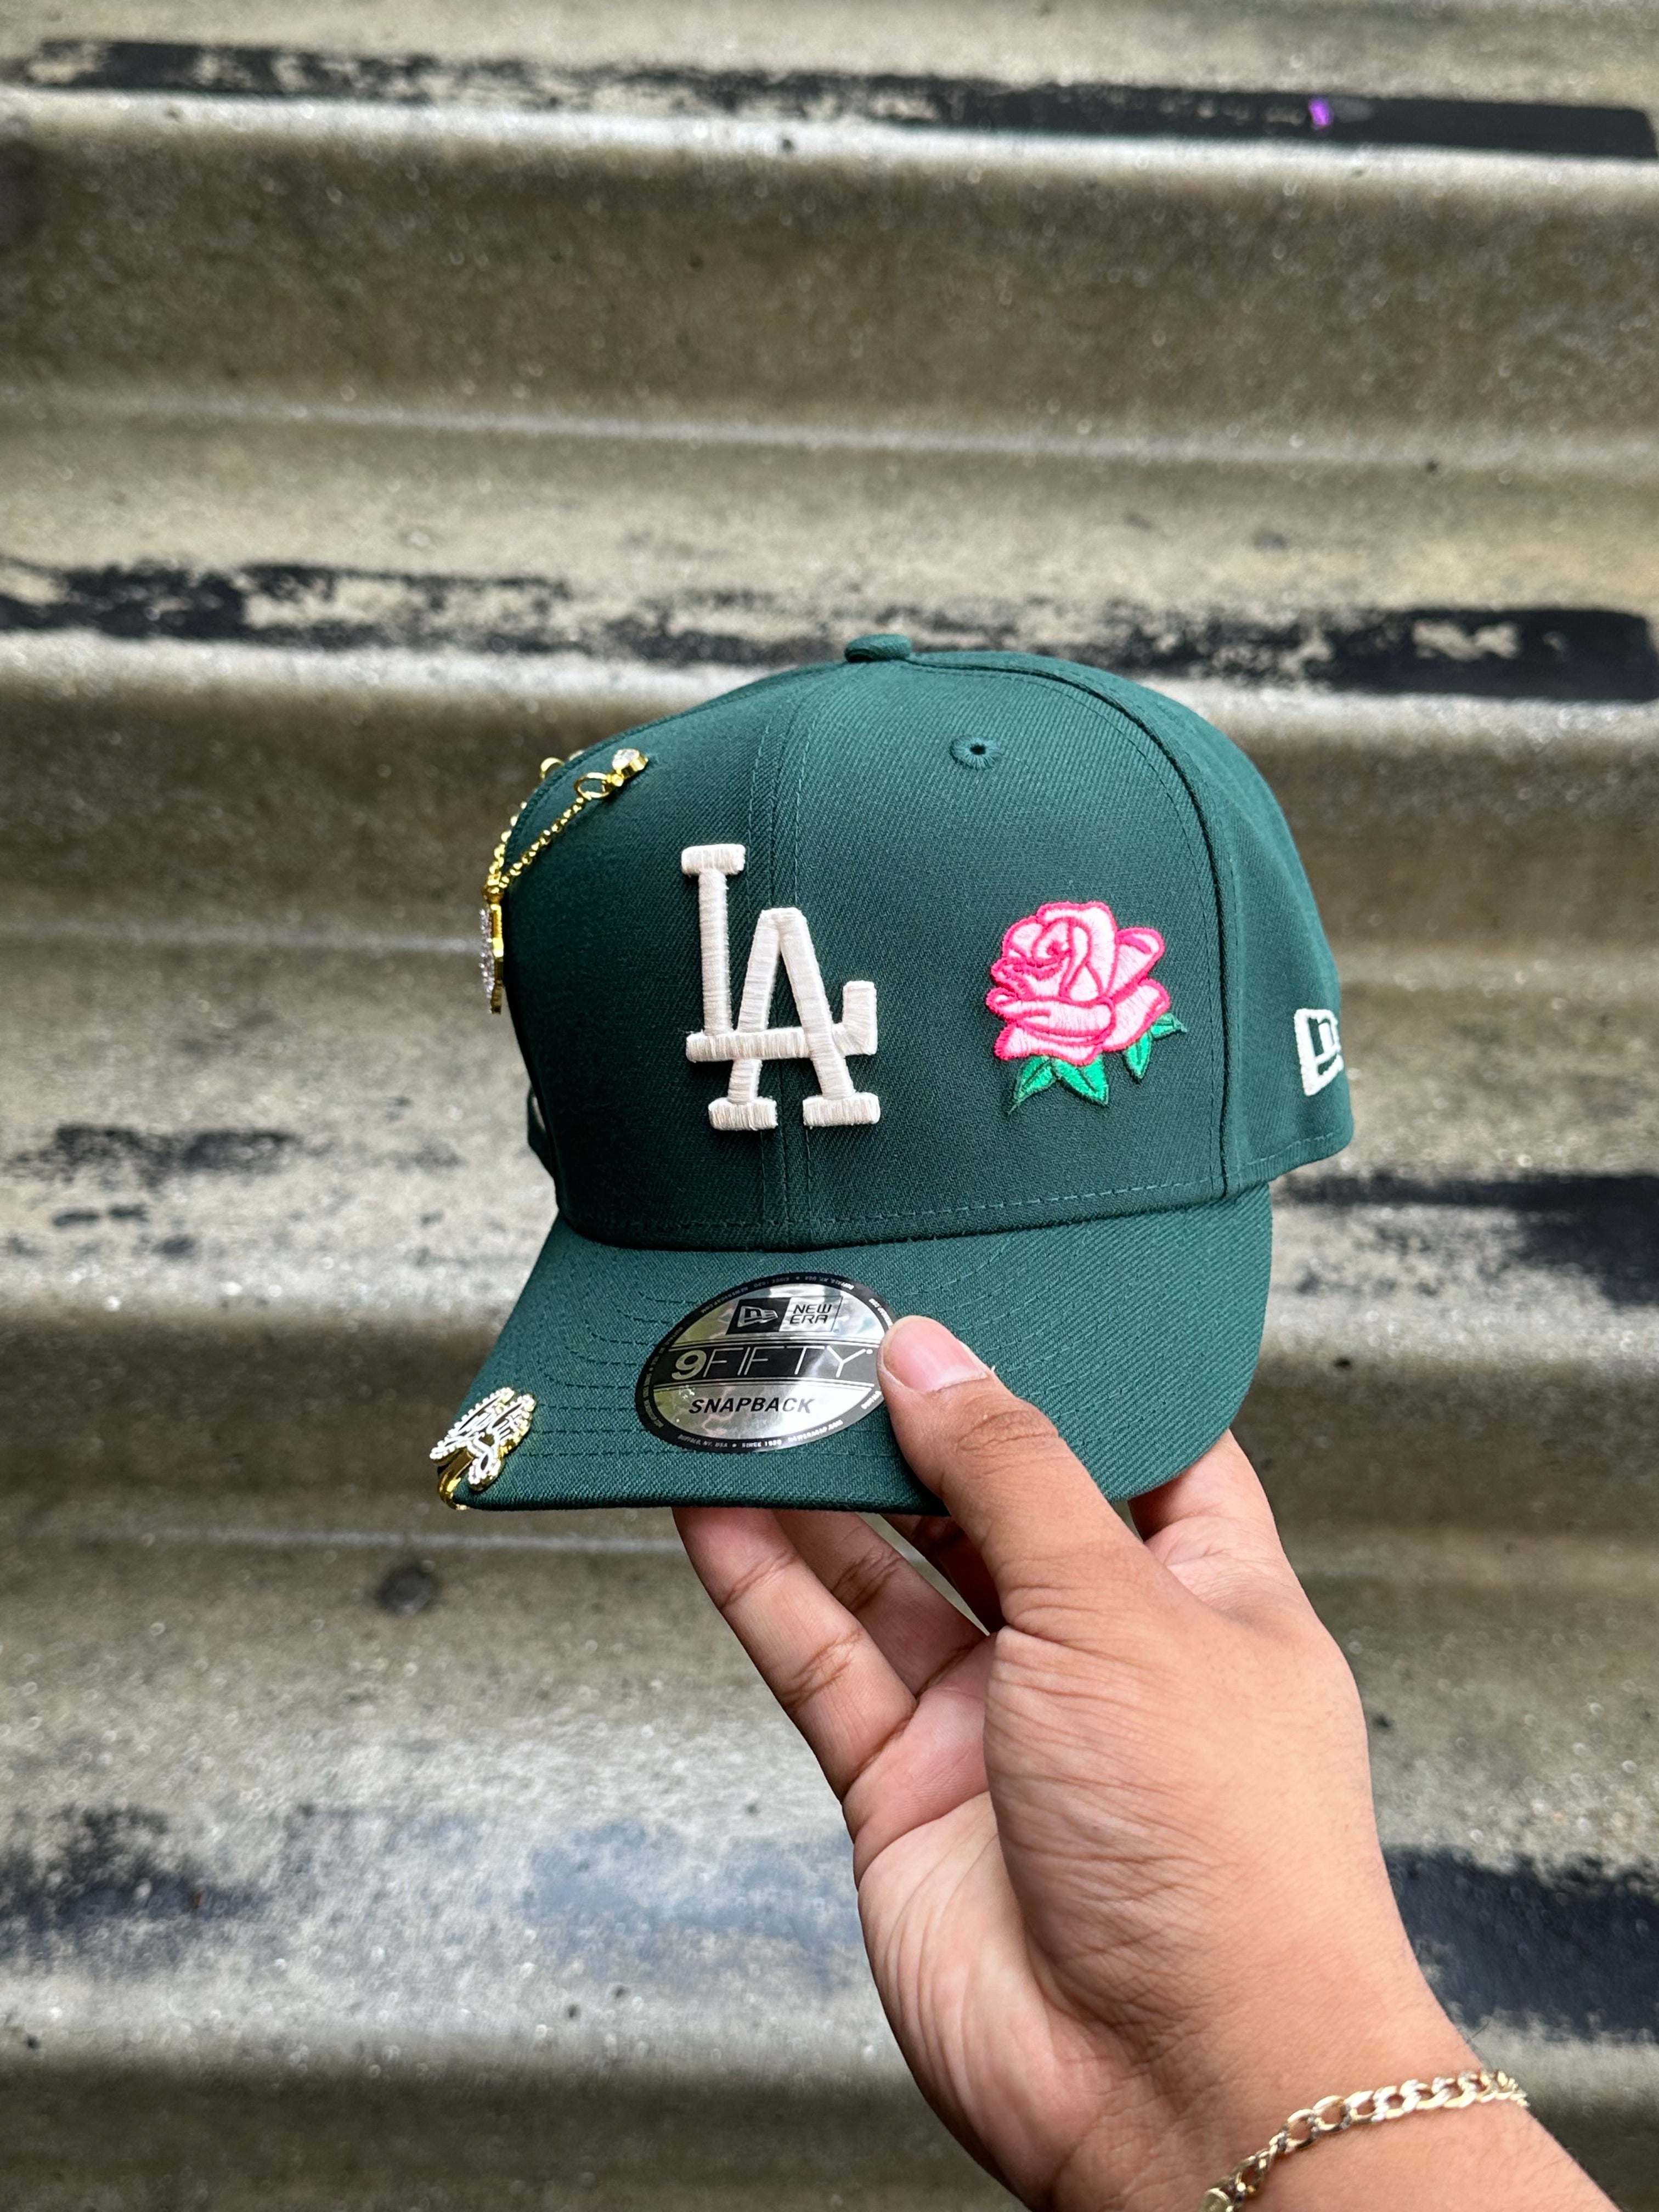 NEW ERA EXCLUSIVE 9FIFTY FOREST GREEN LOS ANGELES DODGERS SNAPBACK W/ ROSE W/ 2020 WORLD SERIES PATCH